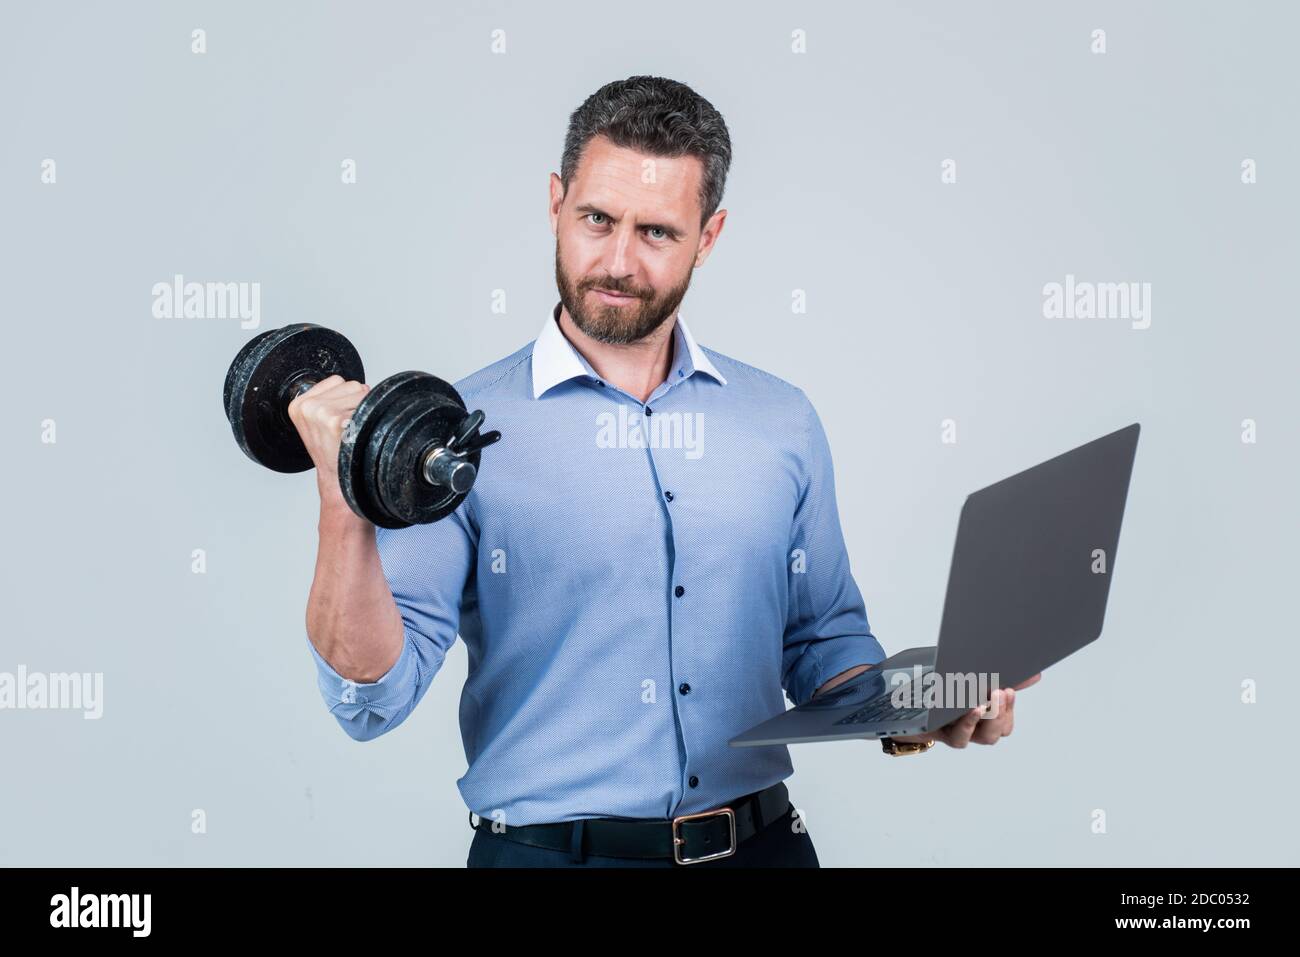 Online work gym that helps spur productivity. Manager hold laptop curling dumbbell. Strength training. Business coach. Fitness at work. Weightlifting workout